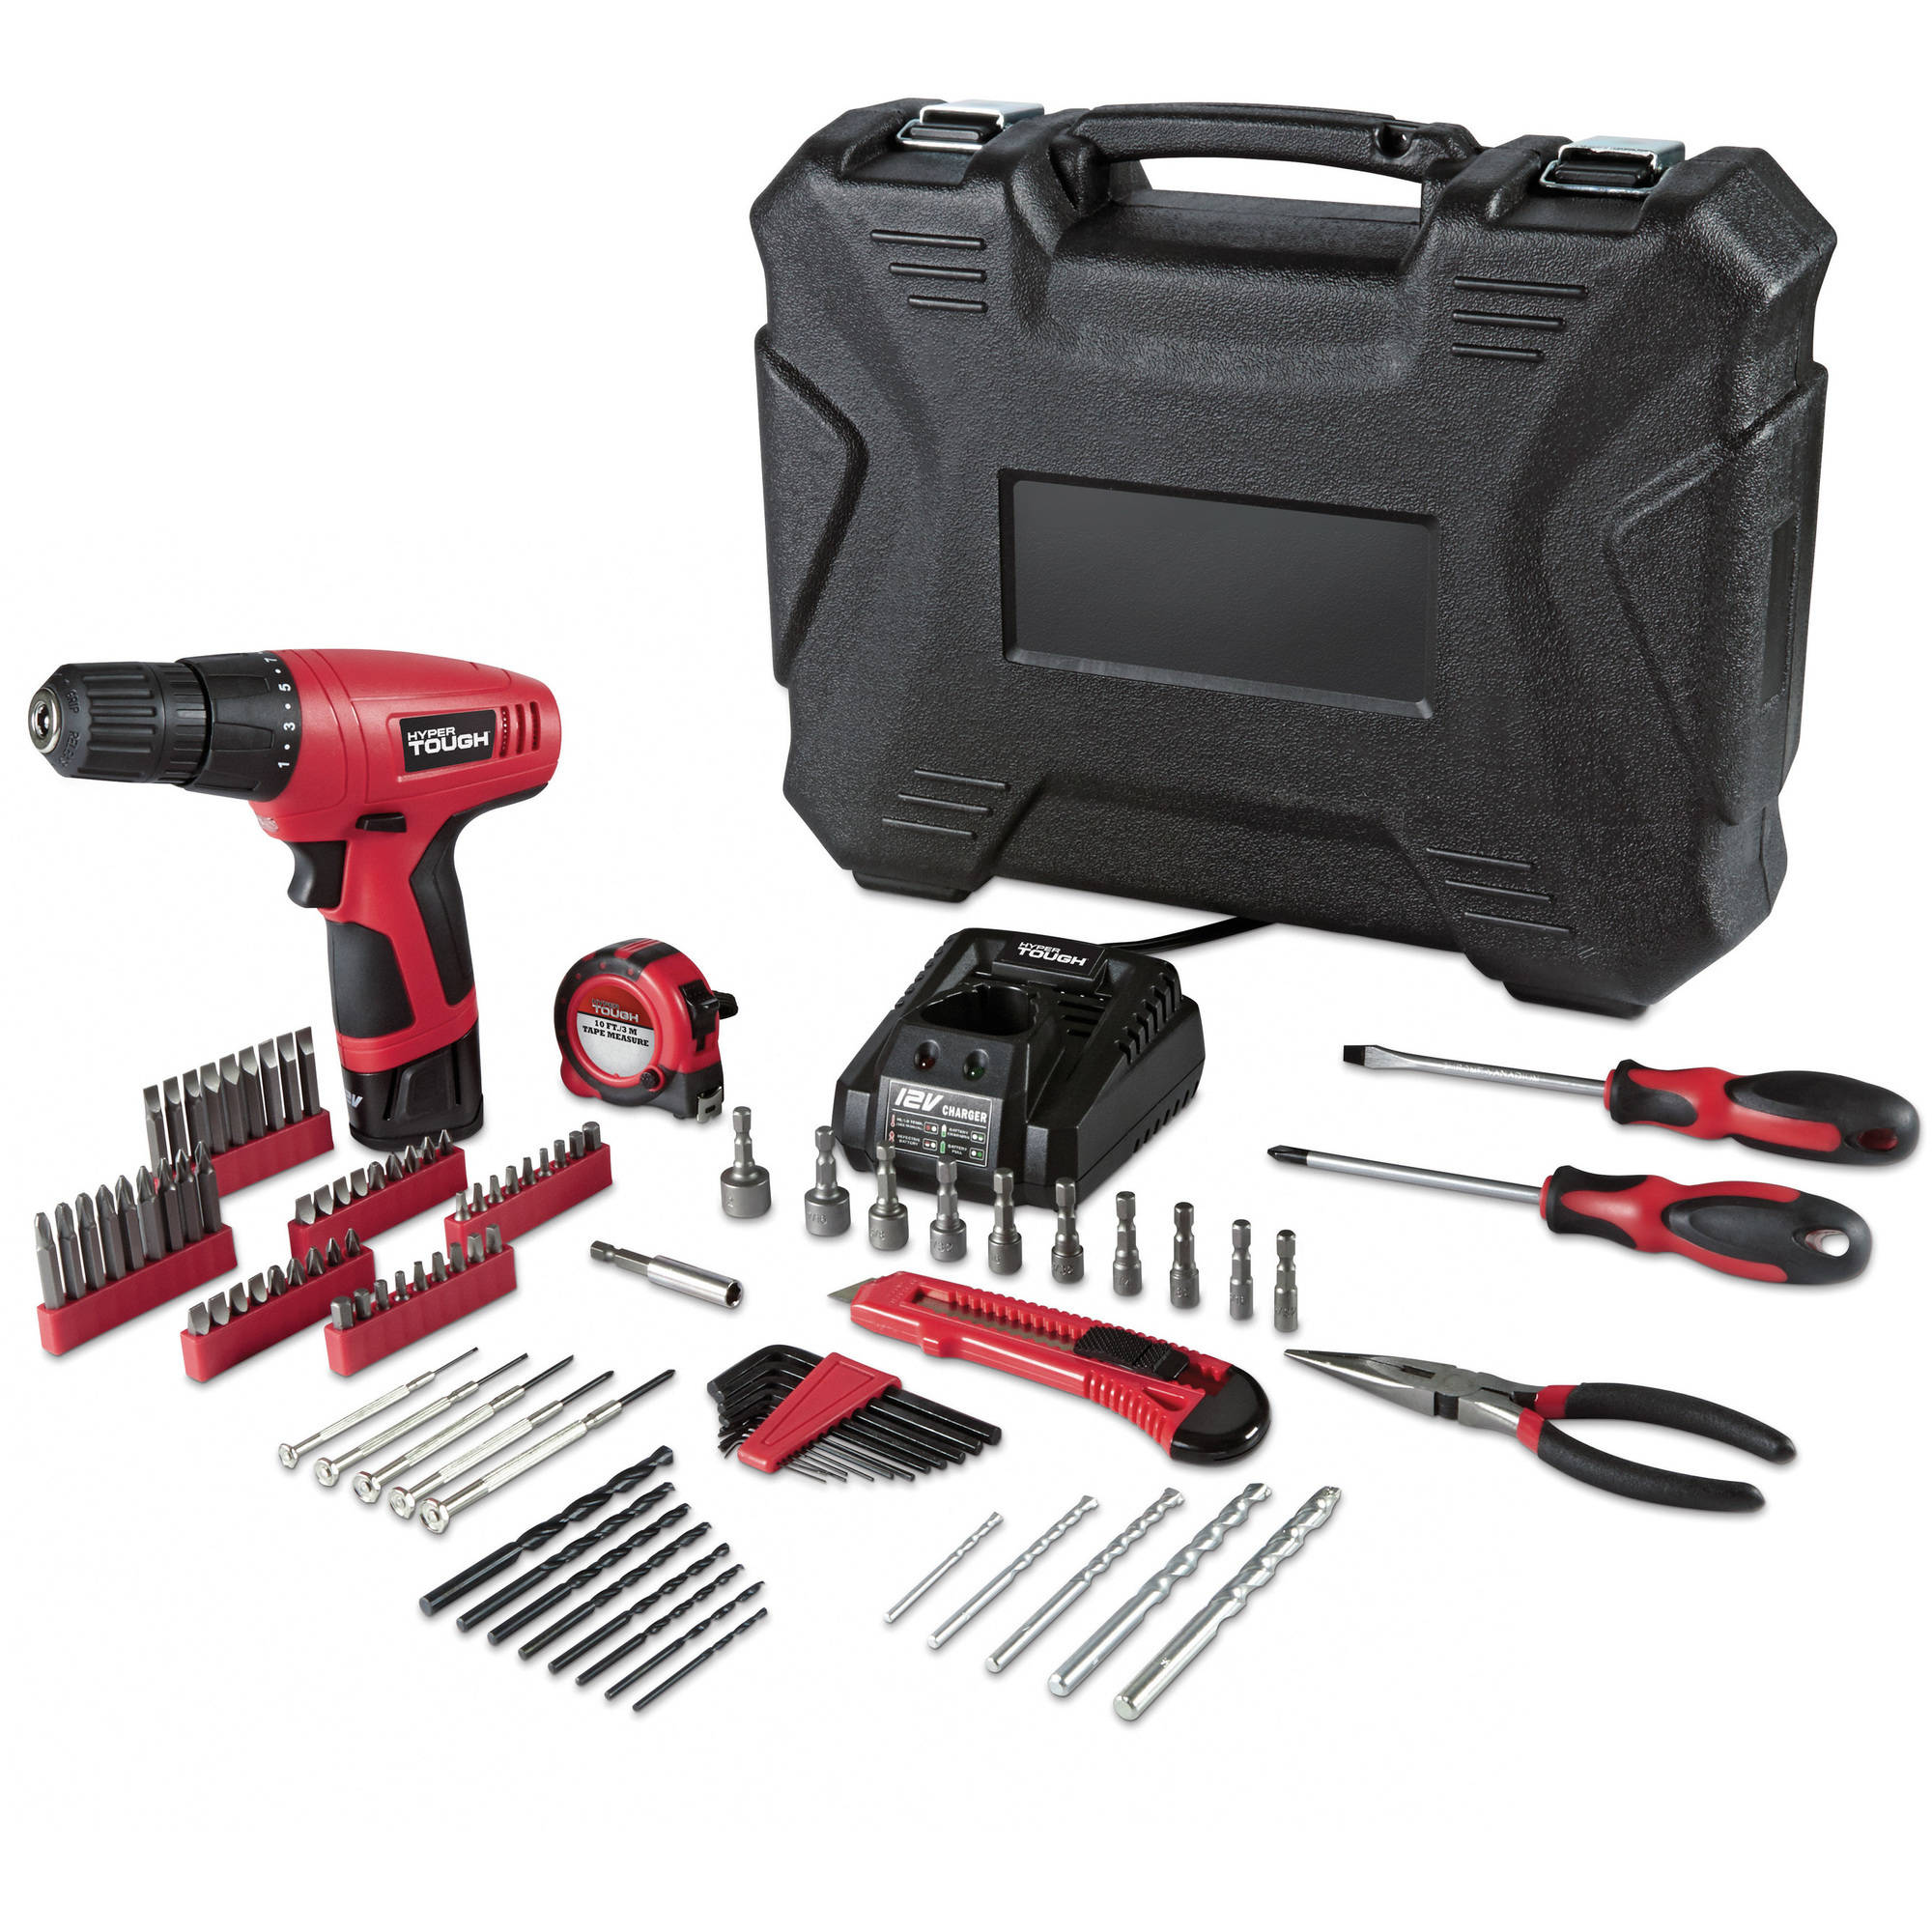 Hyper Tough 5241.41 12V Cordless Drill with 100 Piece Project Kit - image 1 of 5